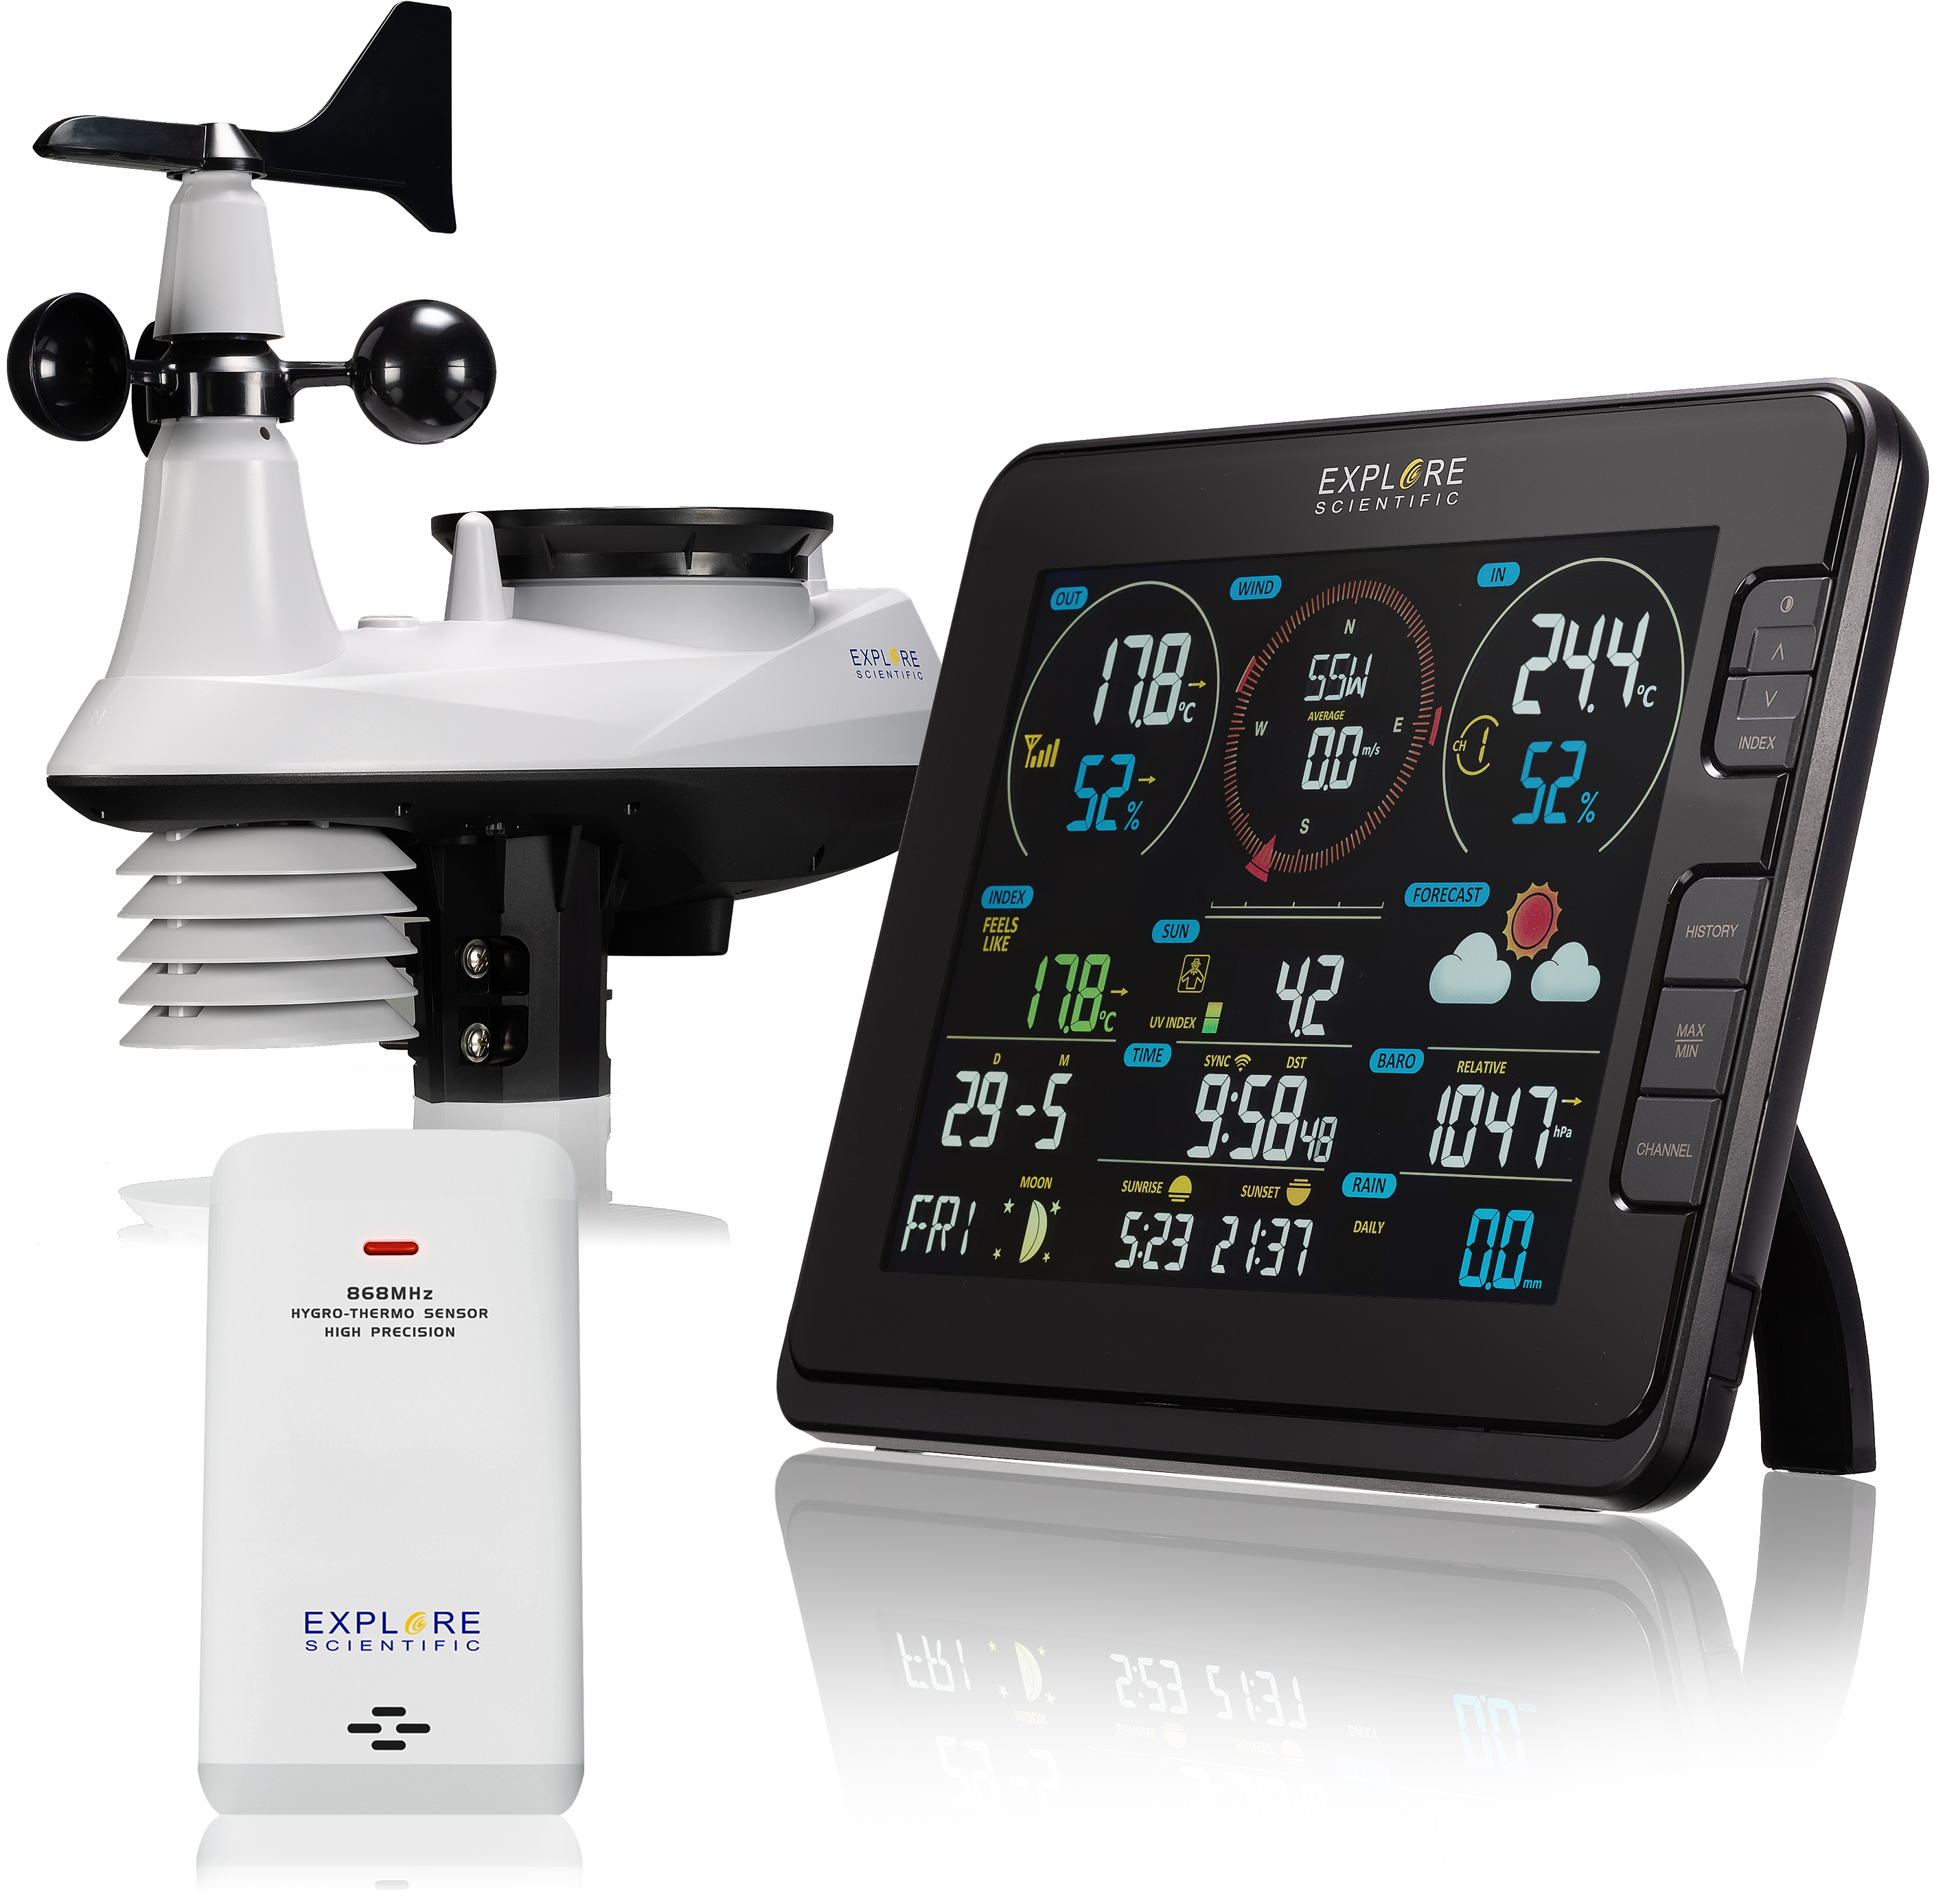 BRESSER professional 7-in-1 Wi-Fi Weather Station with Light Intensity and UV Measurement Function